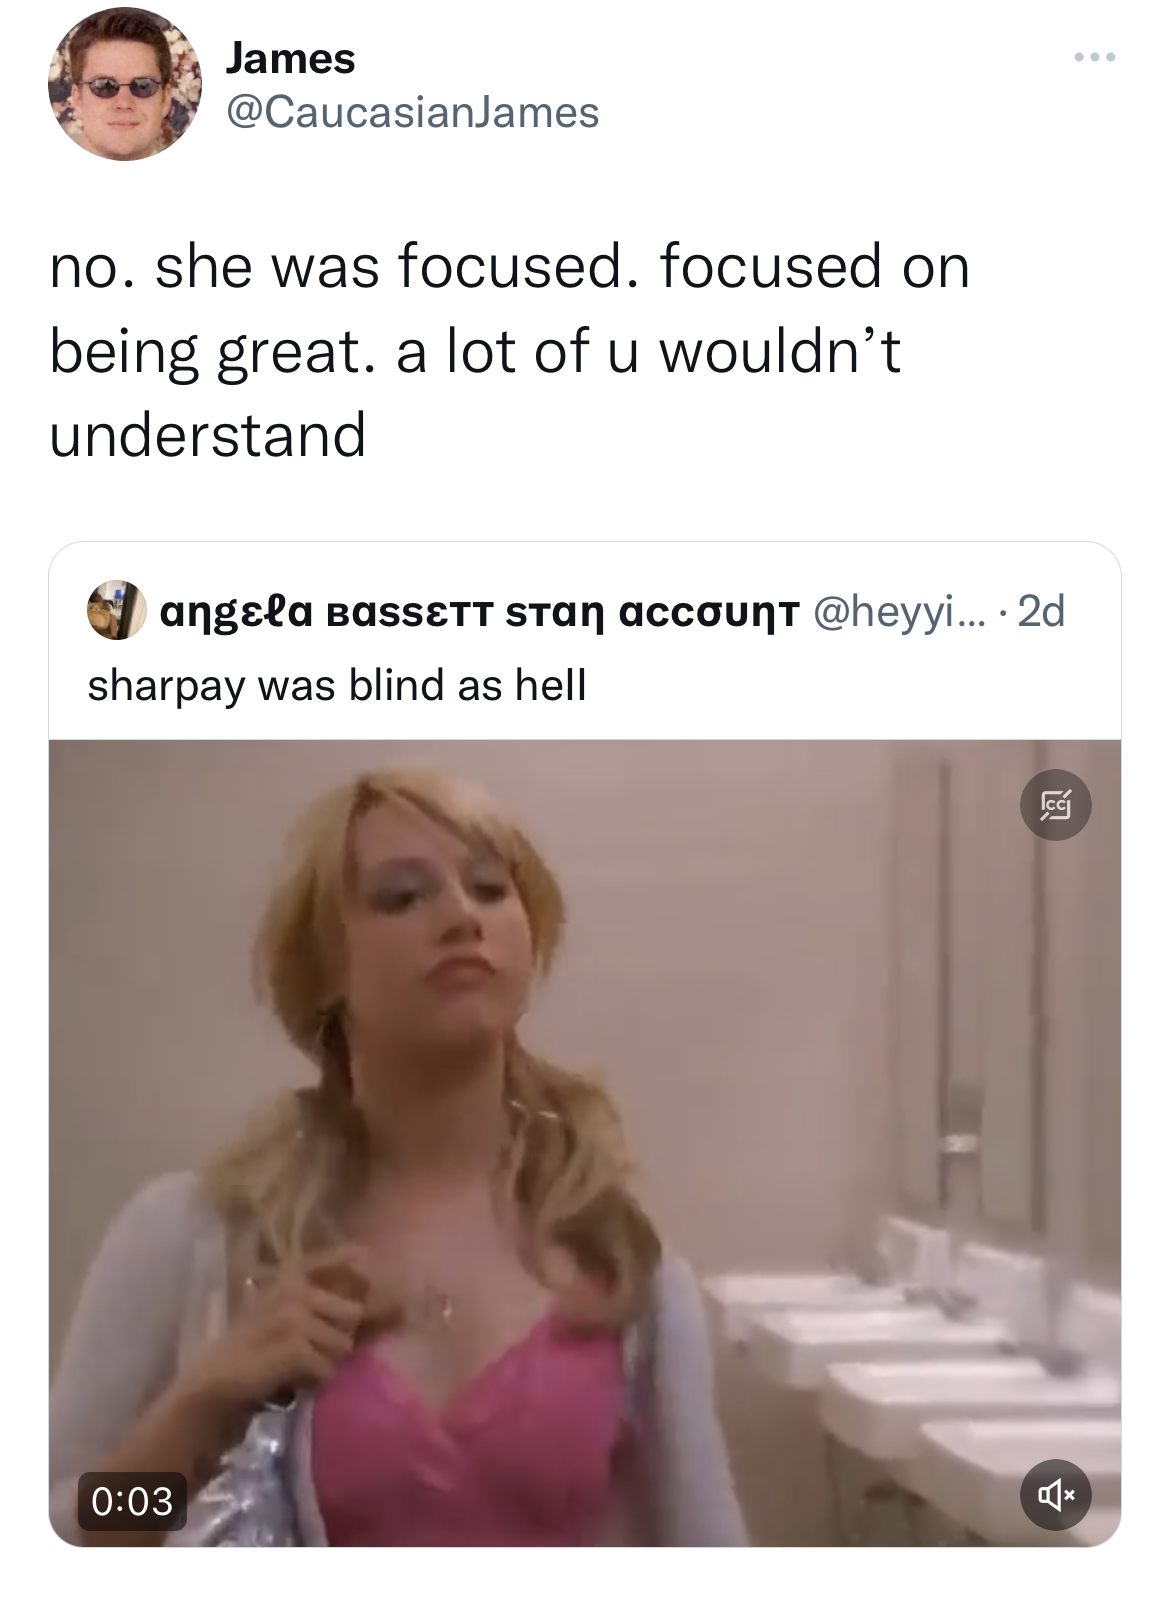 shoulder - James no. she was focused. focused on being great. a lot of u wouldn't understand angela Bassett San account .... 2d sharpay was blind as hell